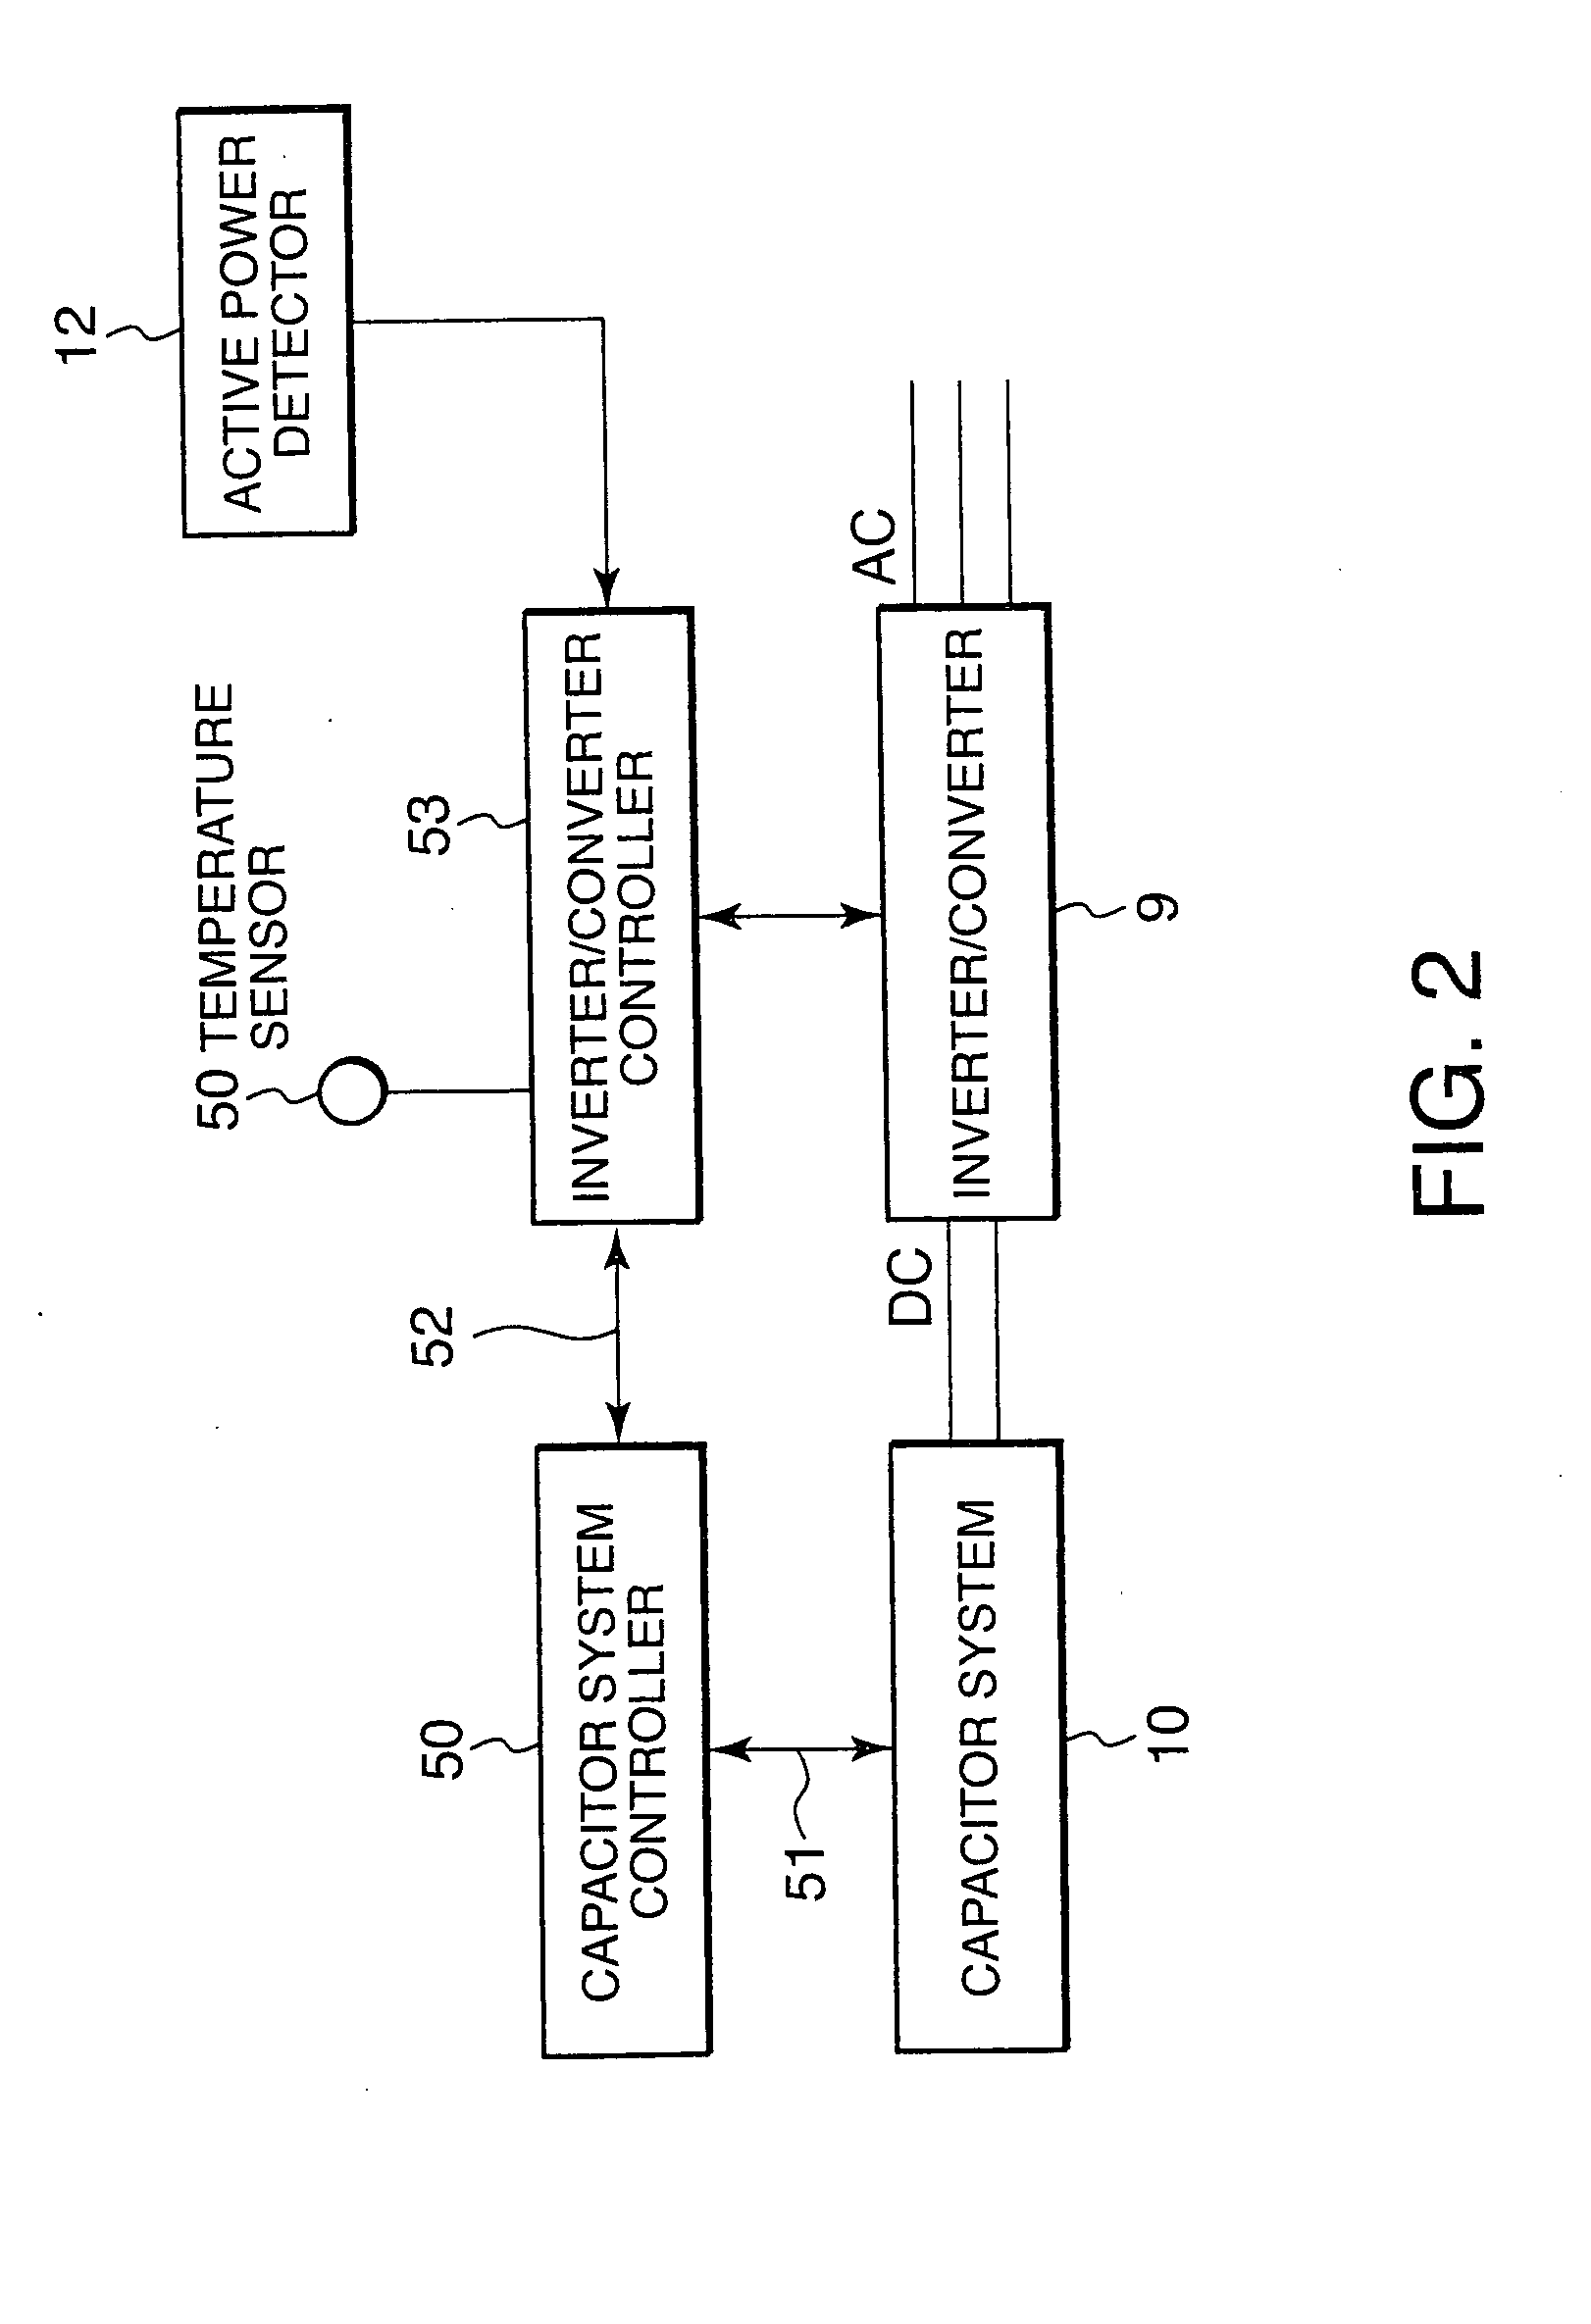 Charged/Discharged Power control for a Capacitor Type Energy Storage Device